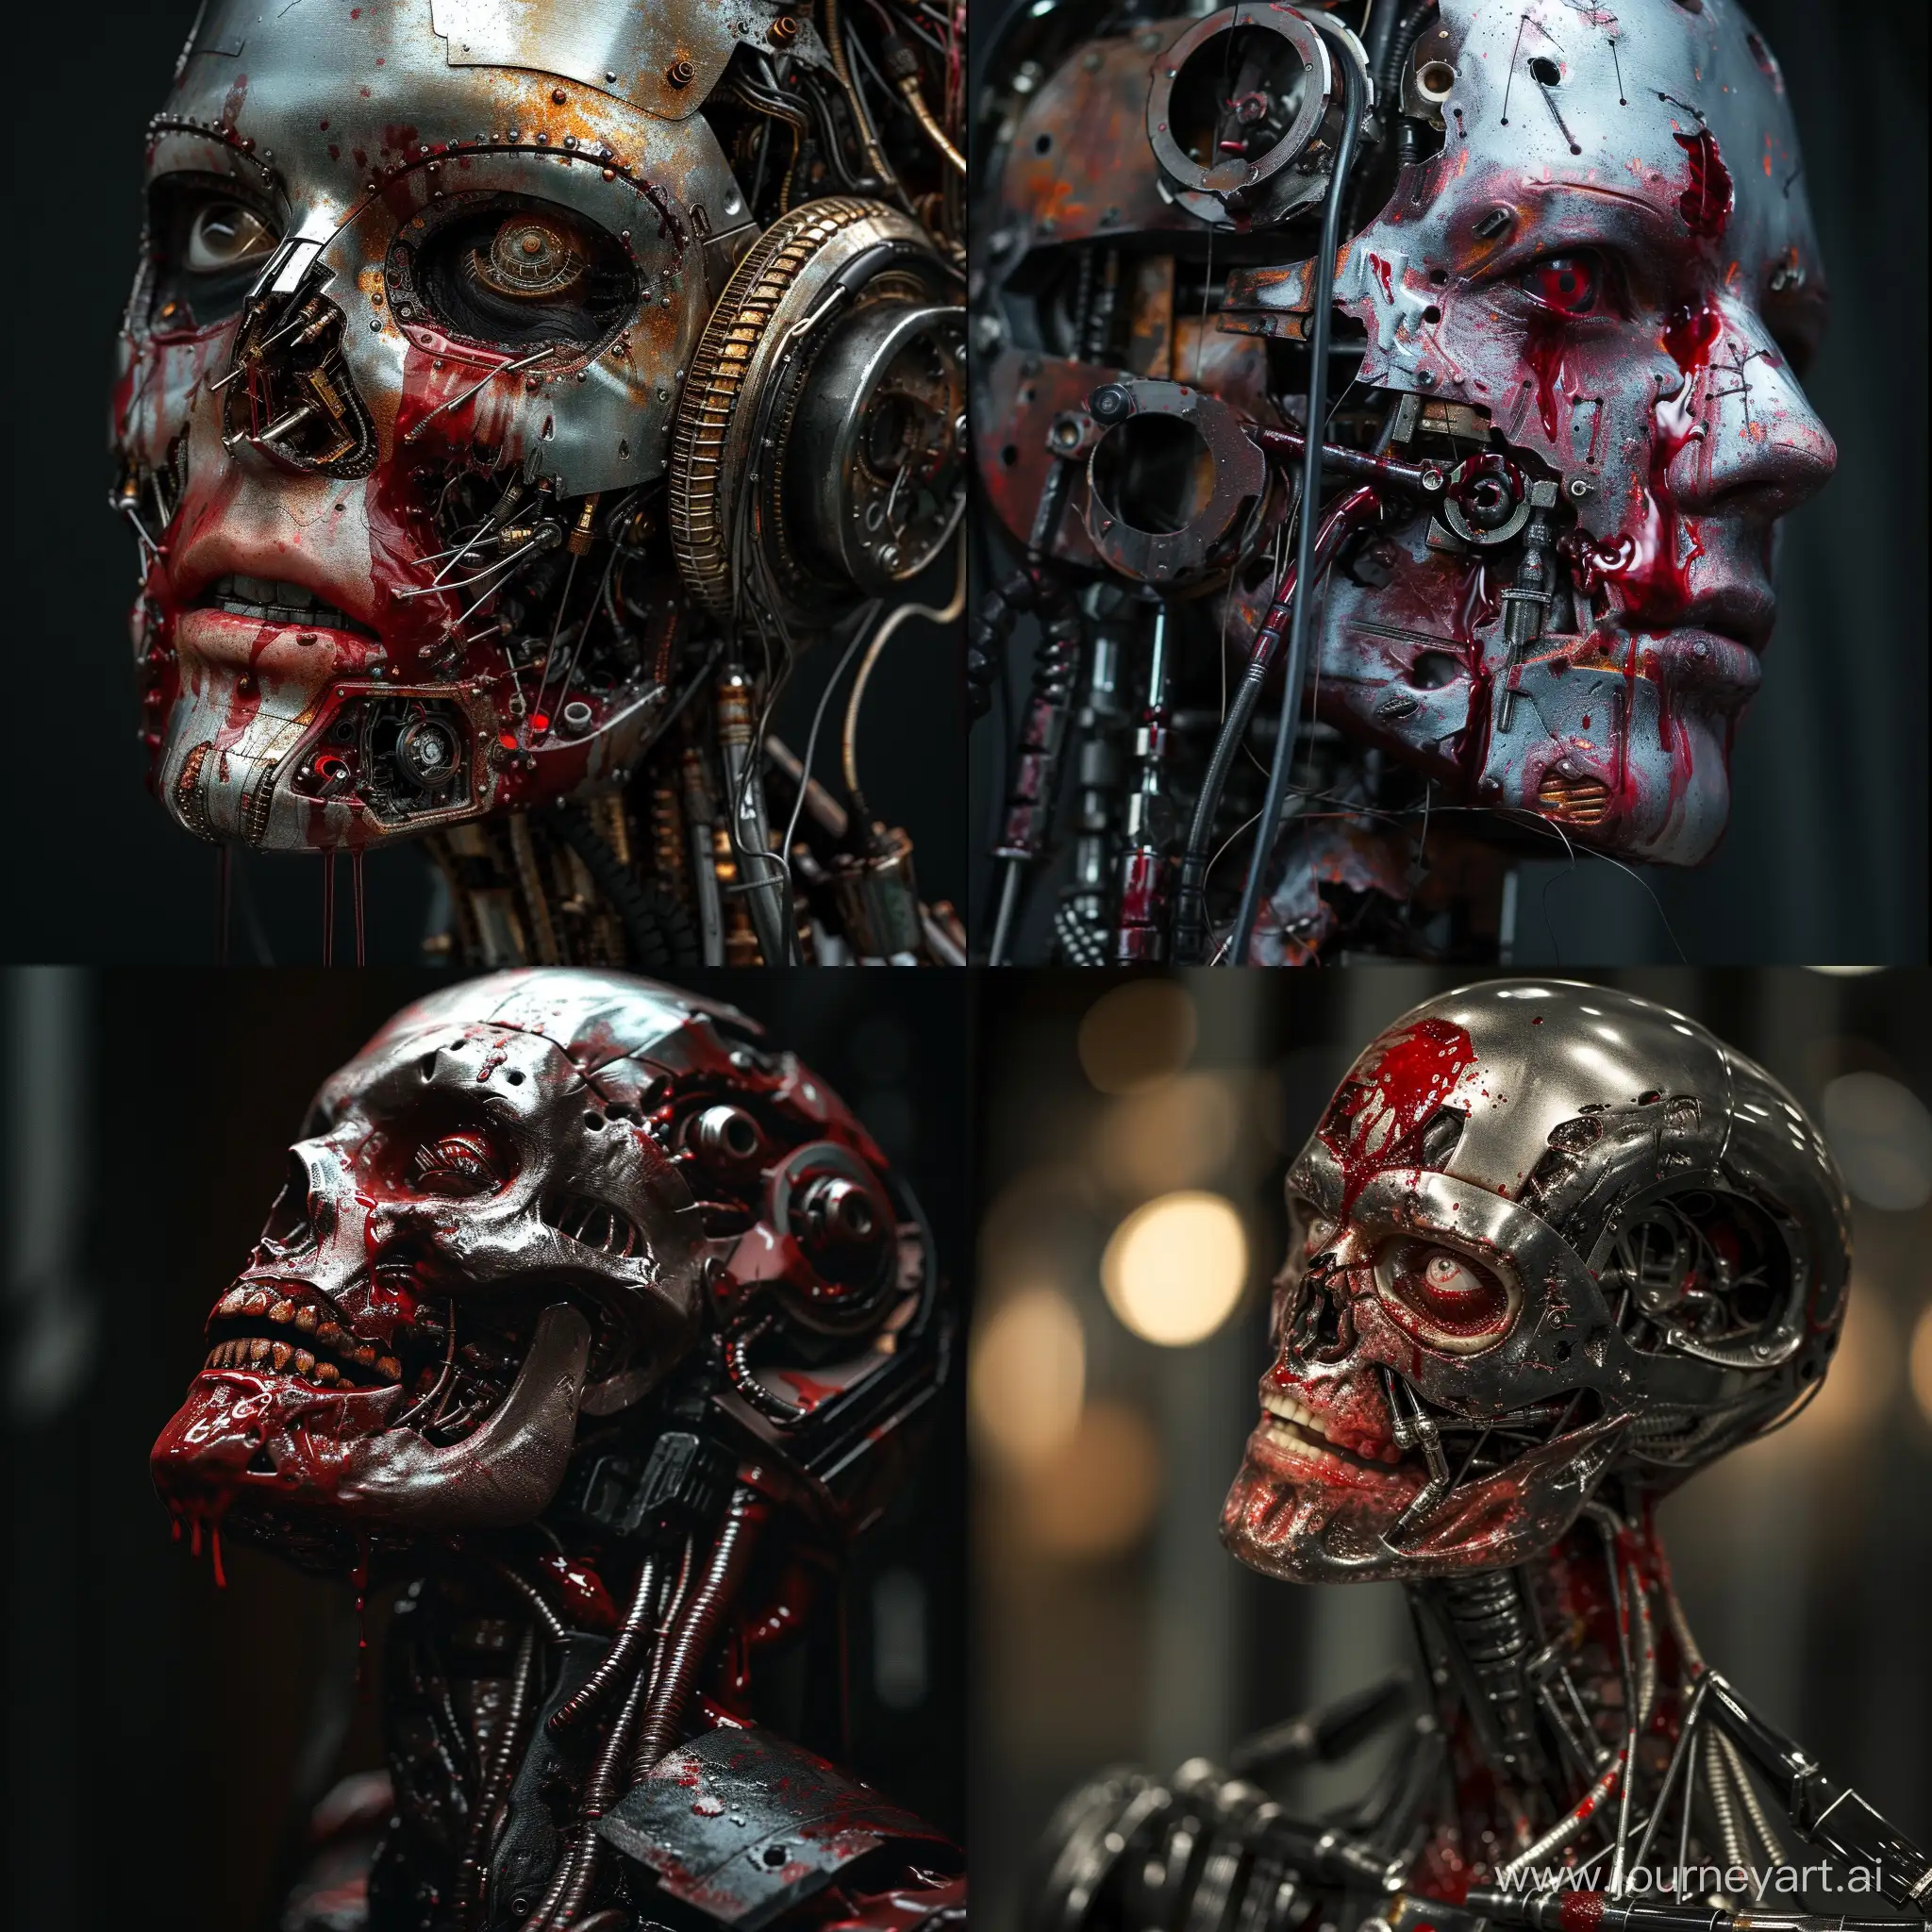 Ethereal-Cyborg-with-Intricate-Metal-Body-Modifications-in-Gory-High-Definition